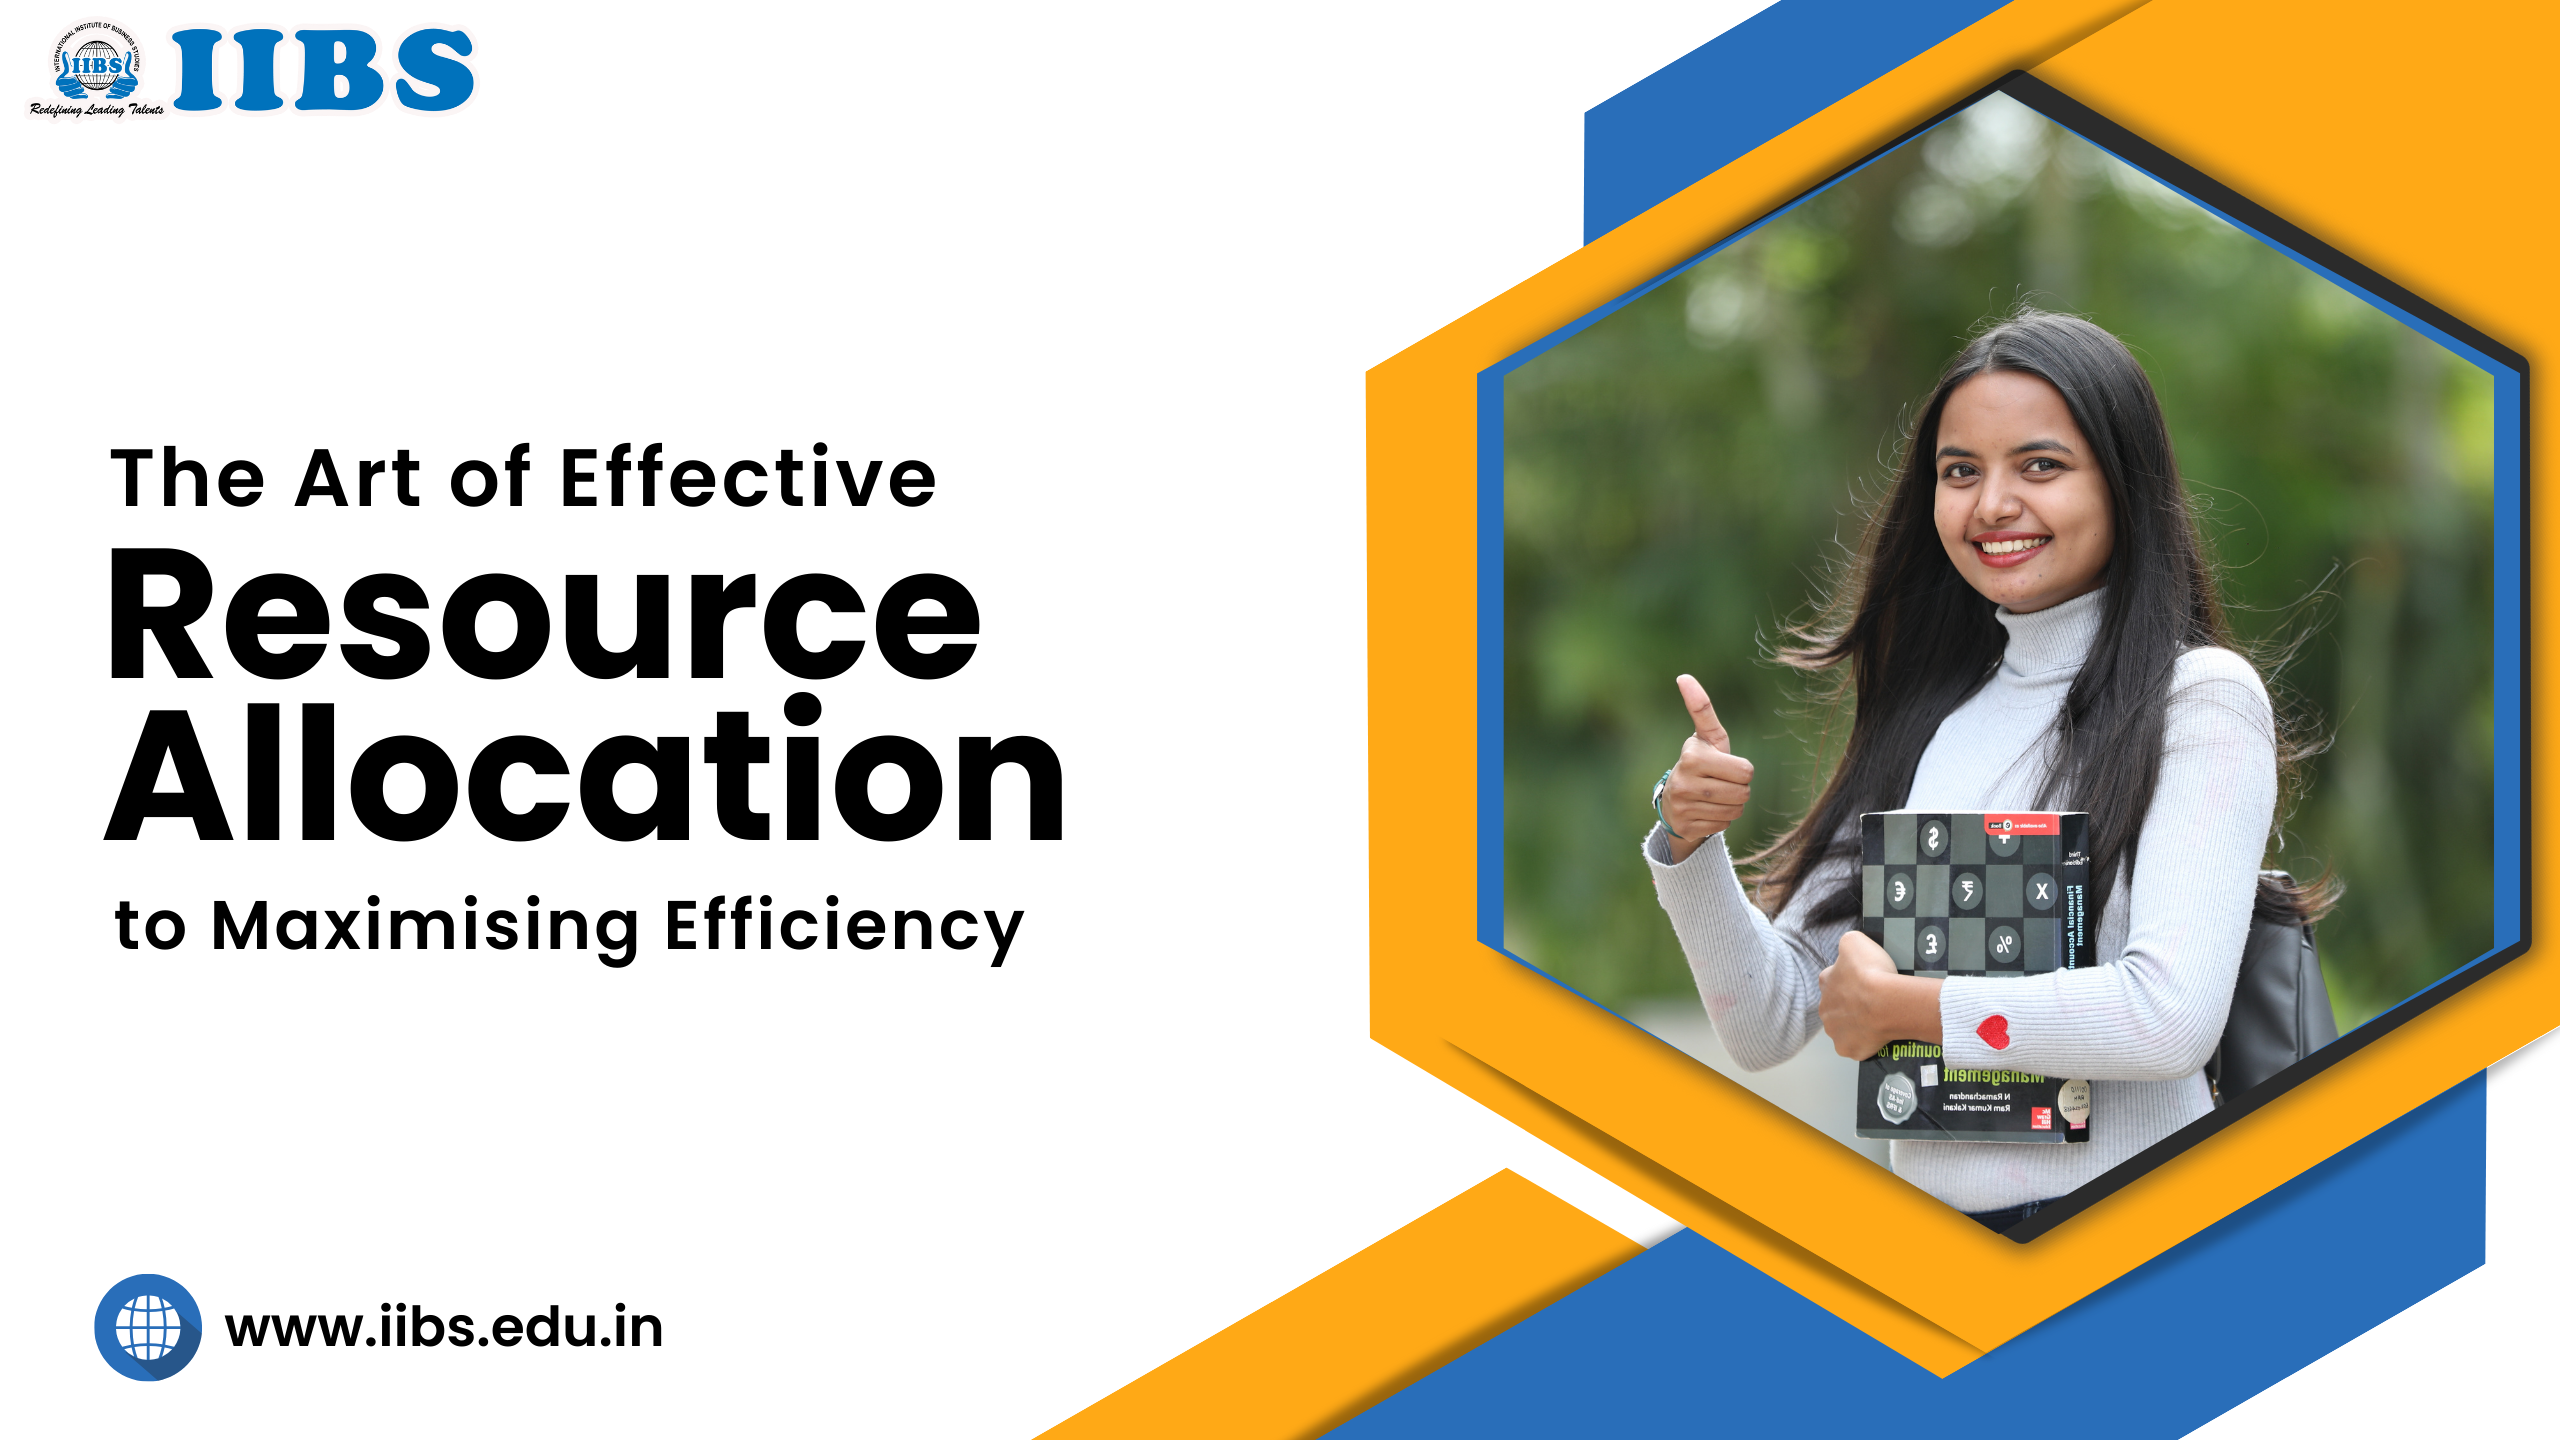 The Art of Effective Resource Allocation to Maximising Efficiency